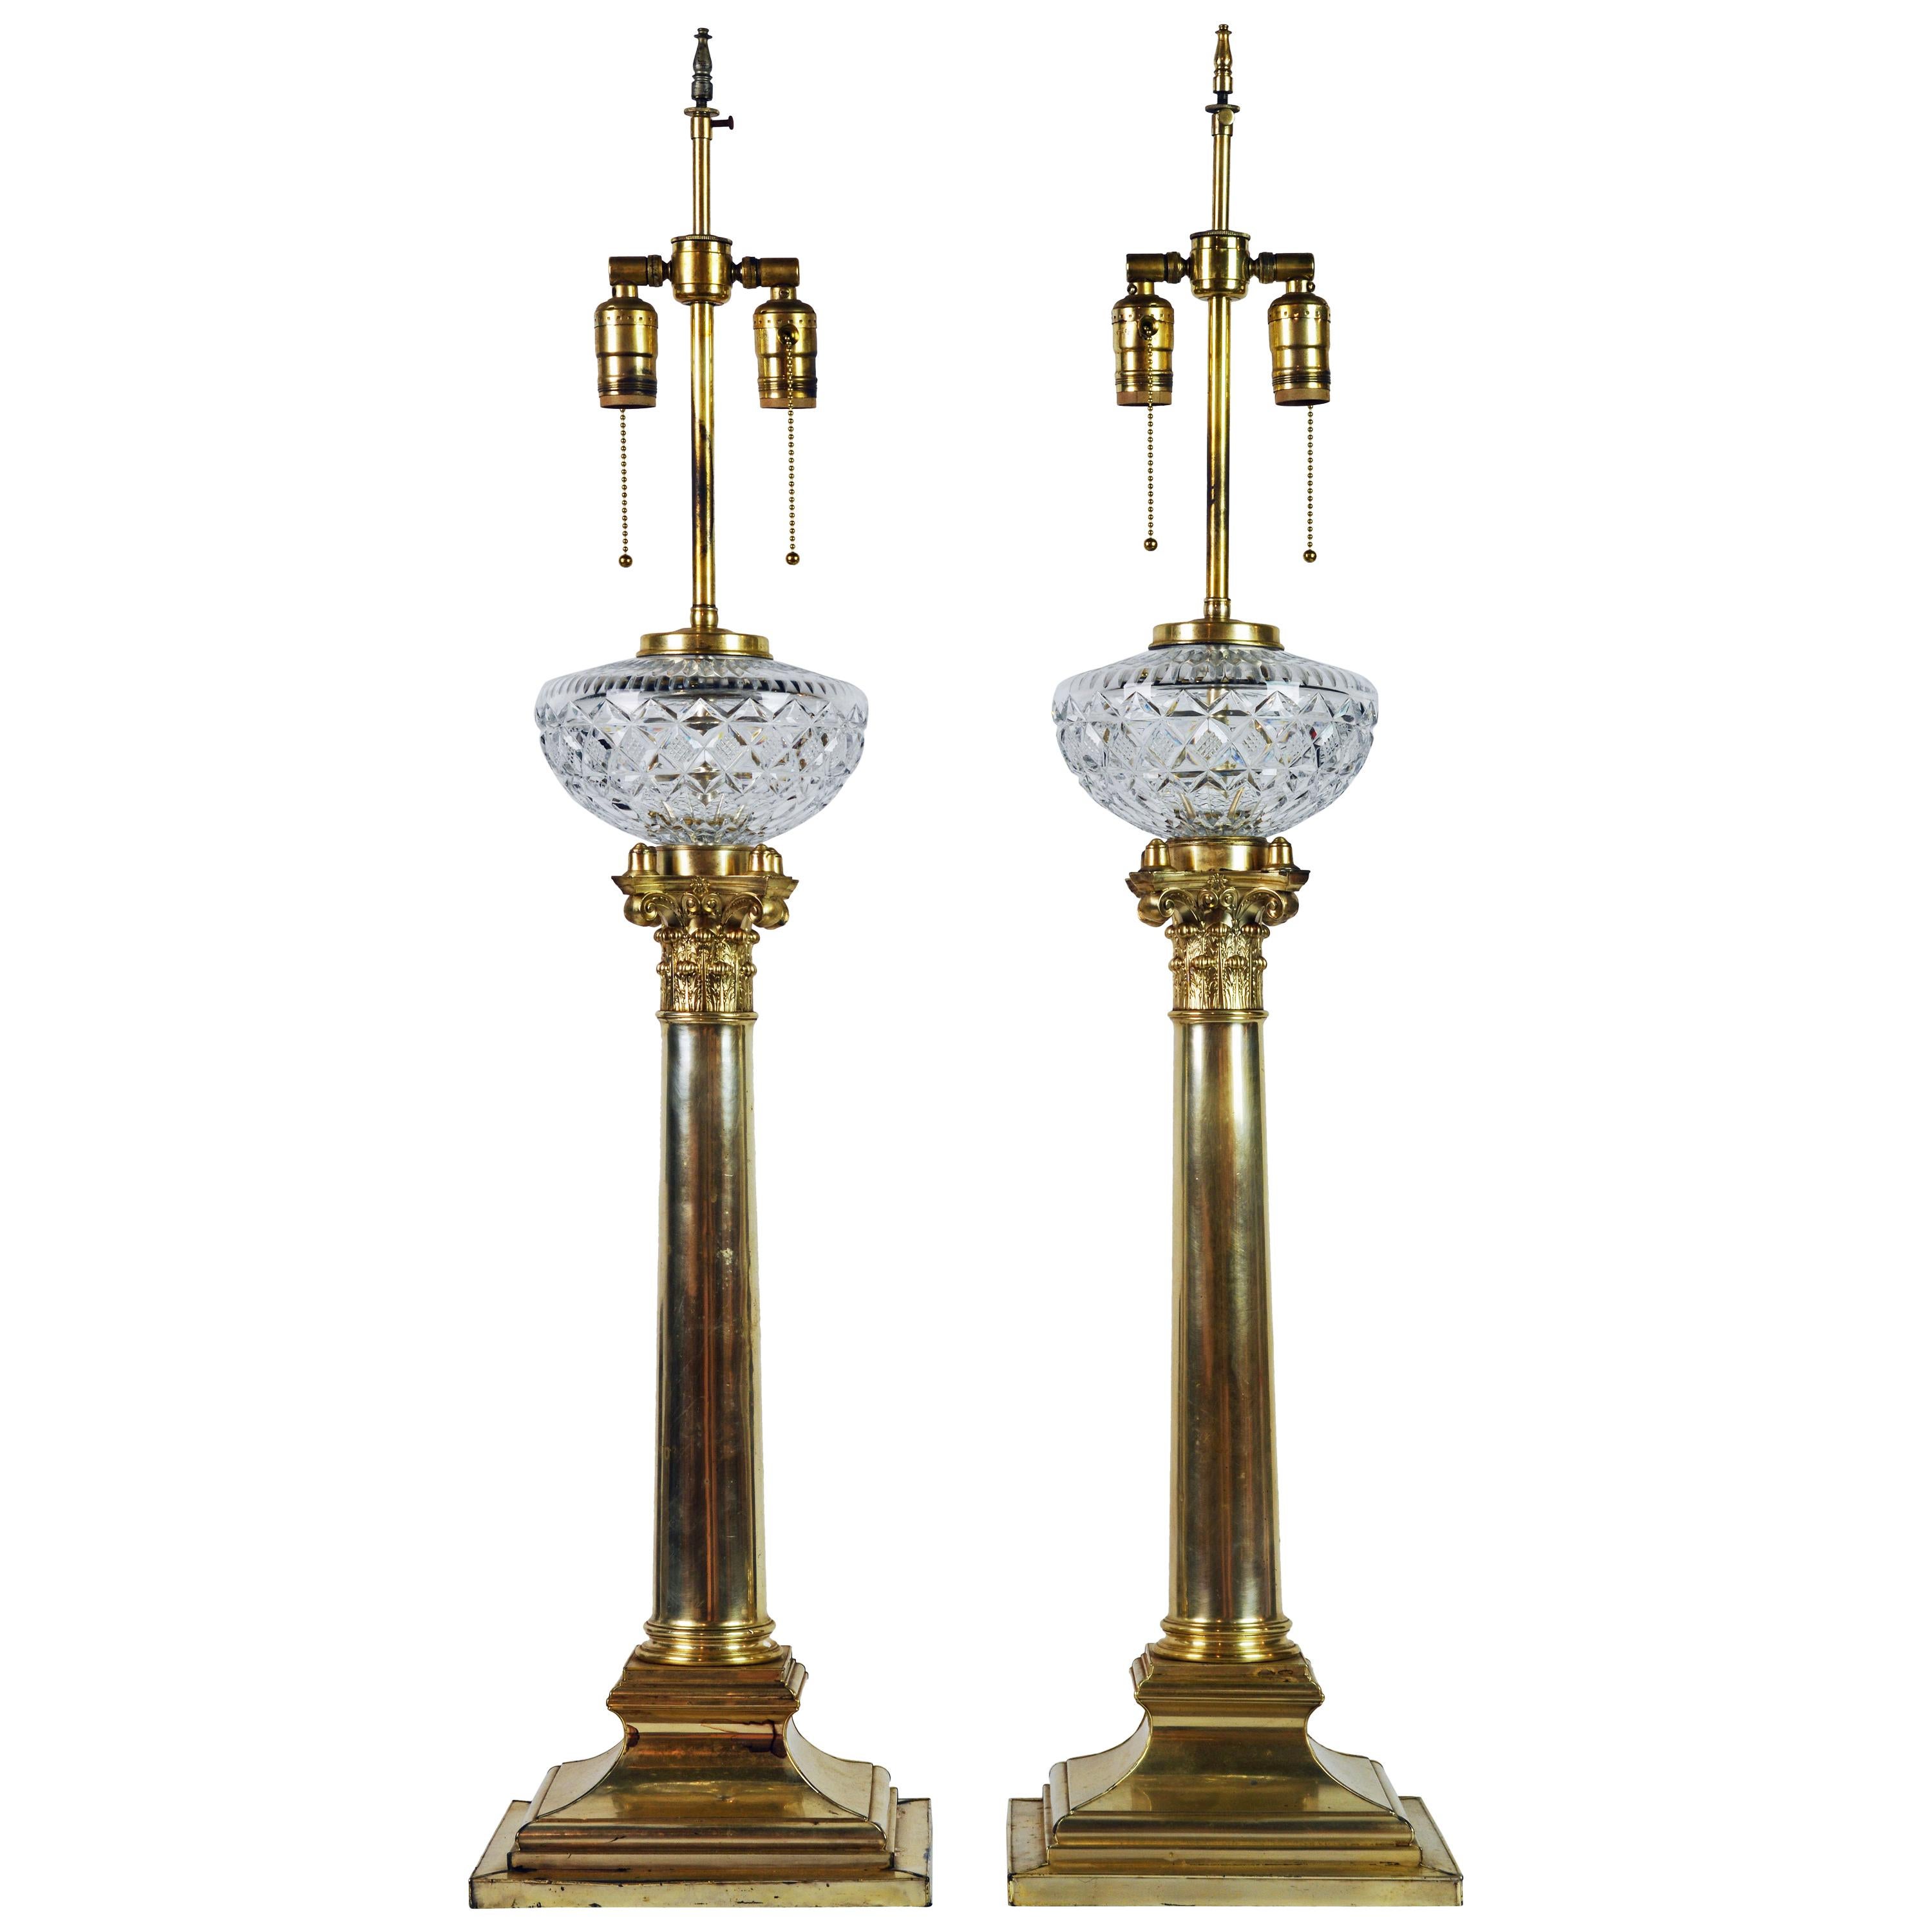 Stately Pair of 19th Century English Silvered Corinthian Column Table Lamps